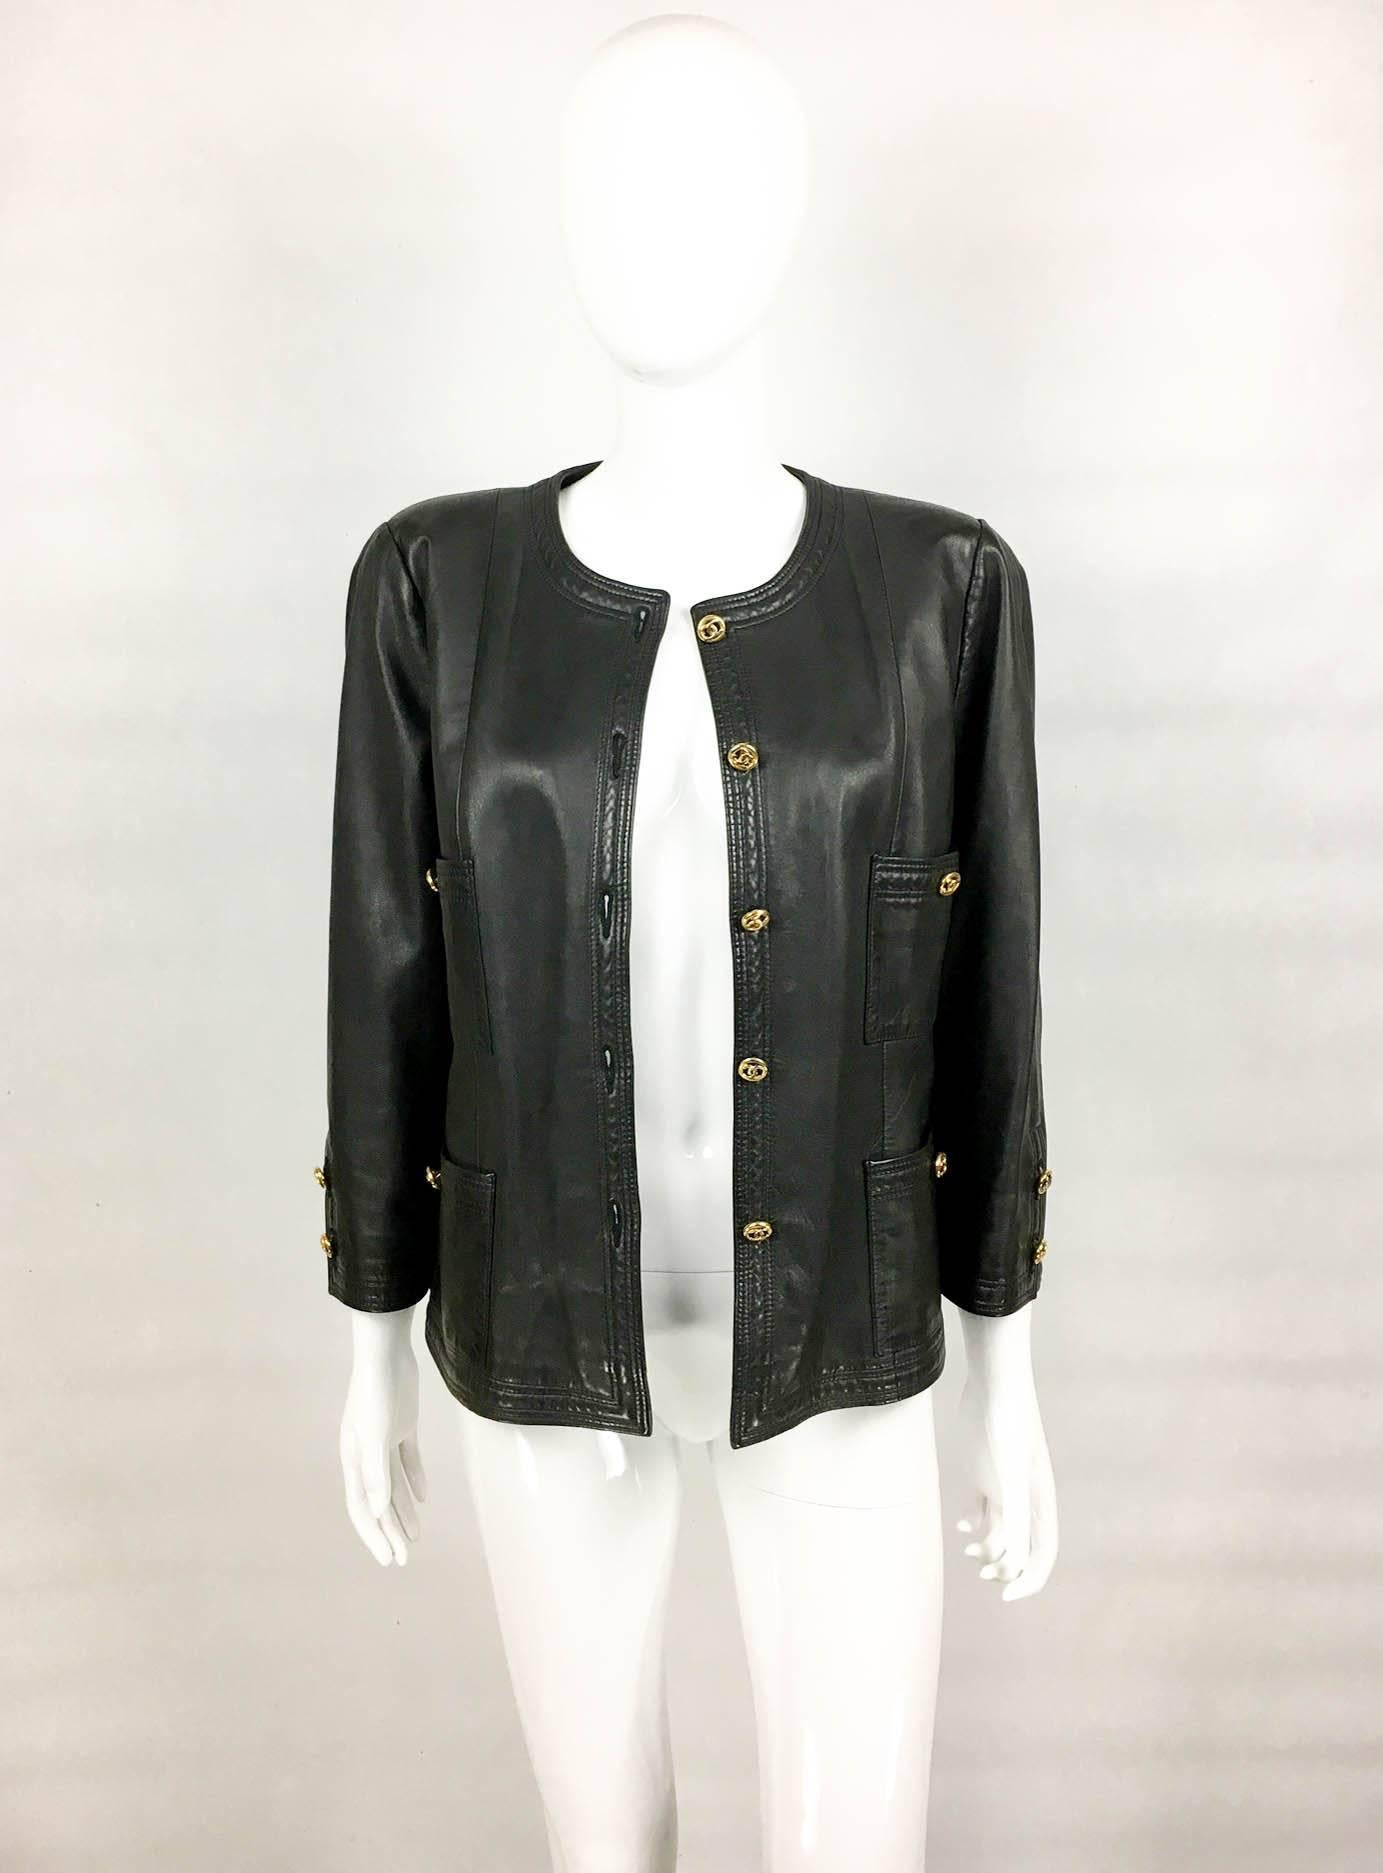 Chanel Black Leather Jacket With Gold-Tone Logo Buttons - 1980s In Excellent Condition In London, Chelsea